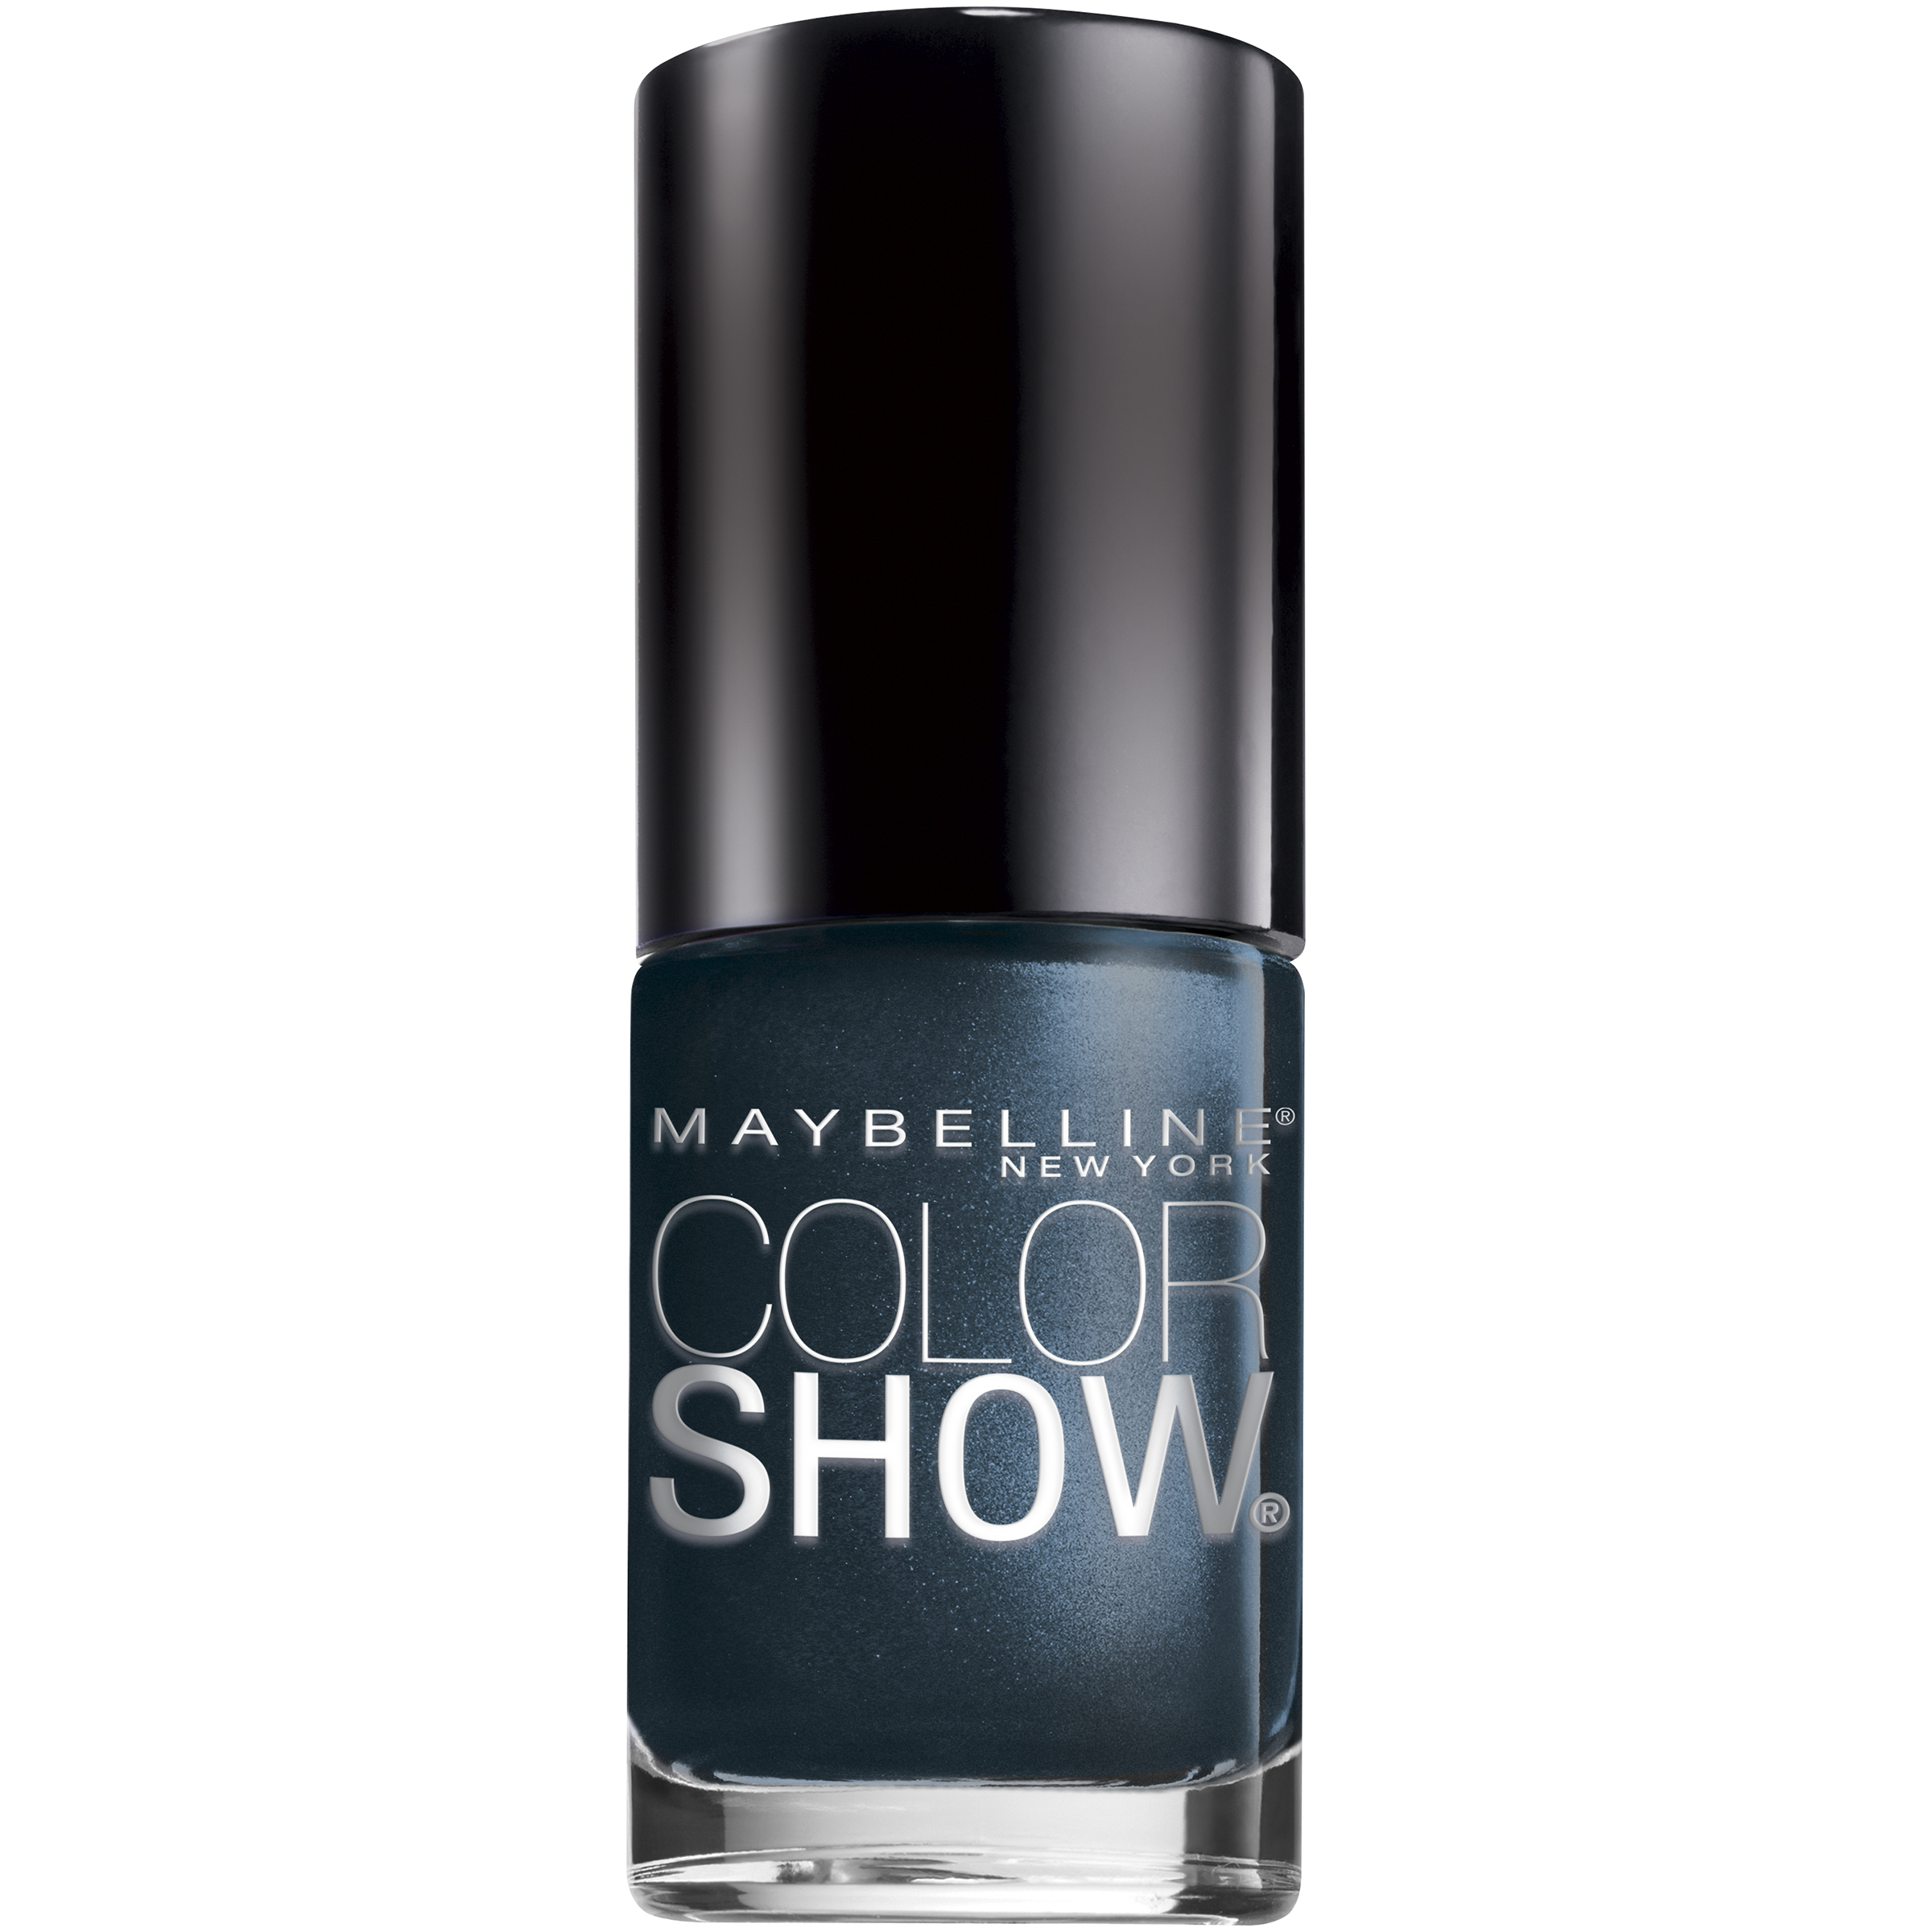 Maybelline New York Nail Lacquer, Home Sweet Chrome, 0.23 fl oz